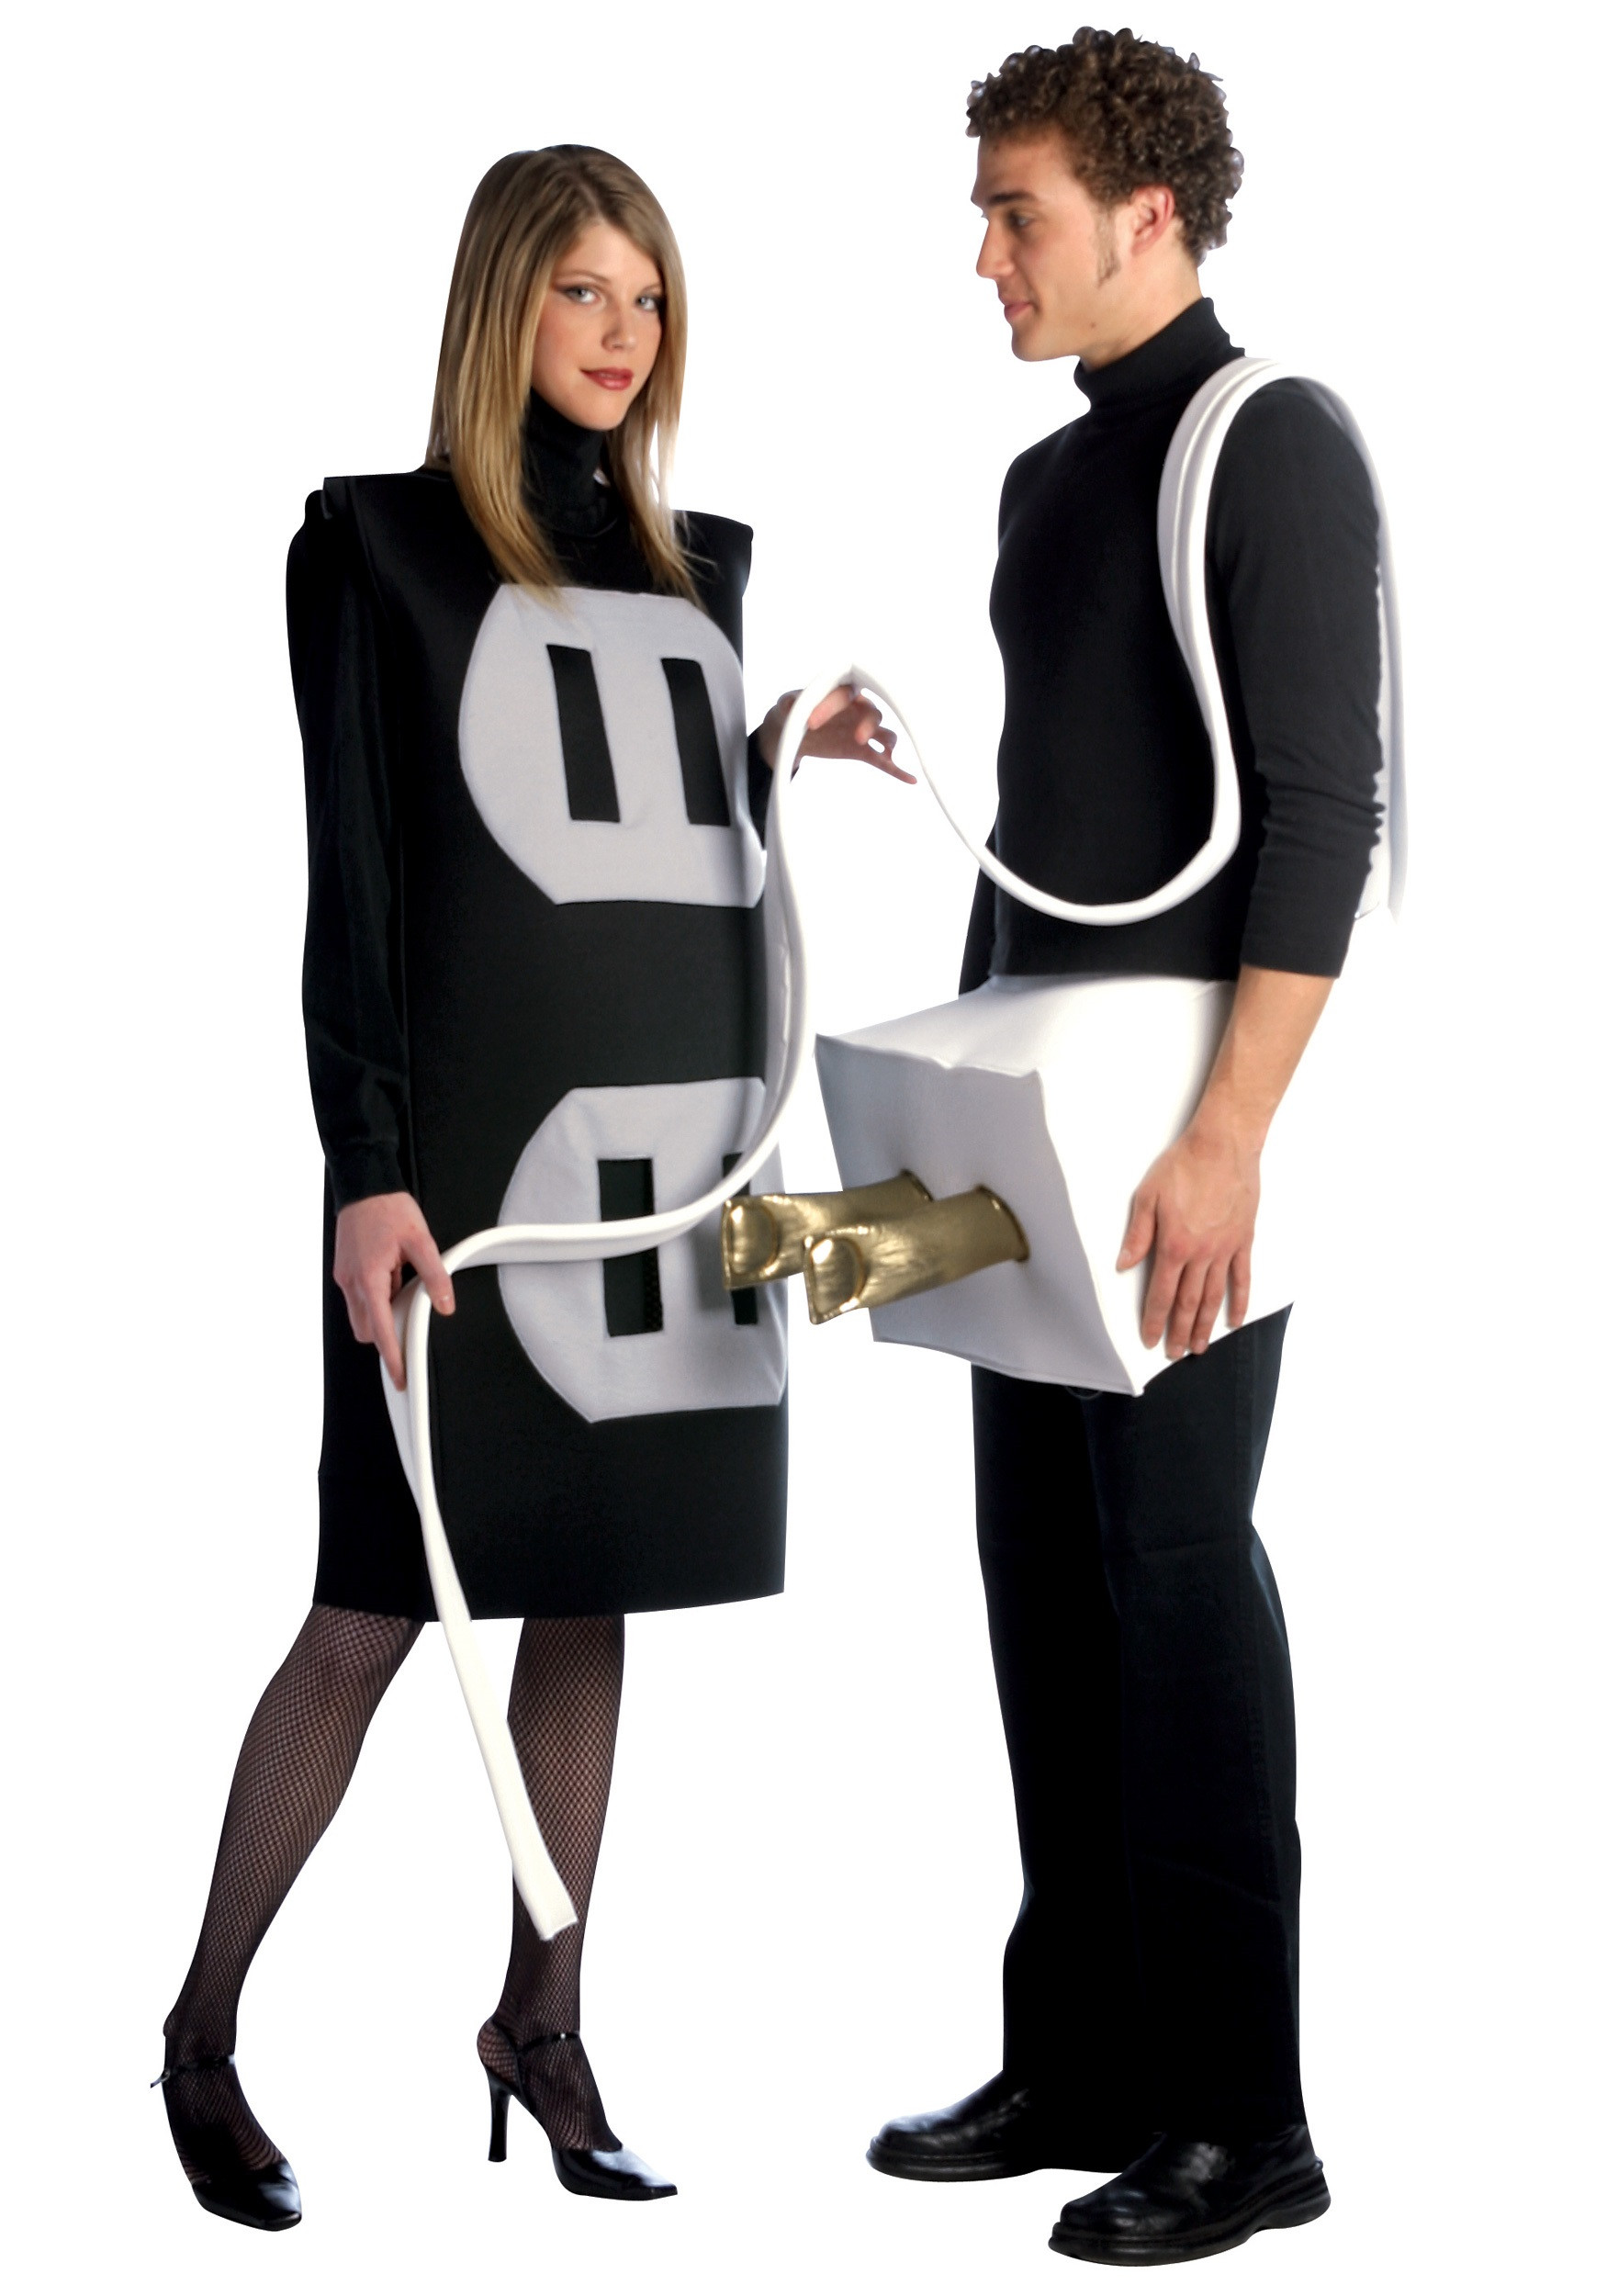 Funny DIY Couples Costumes
 Plug and Socket Costume Funny Couples Costume Ideas